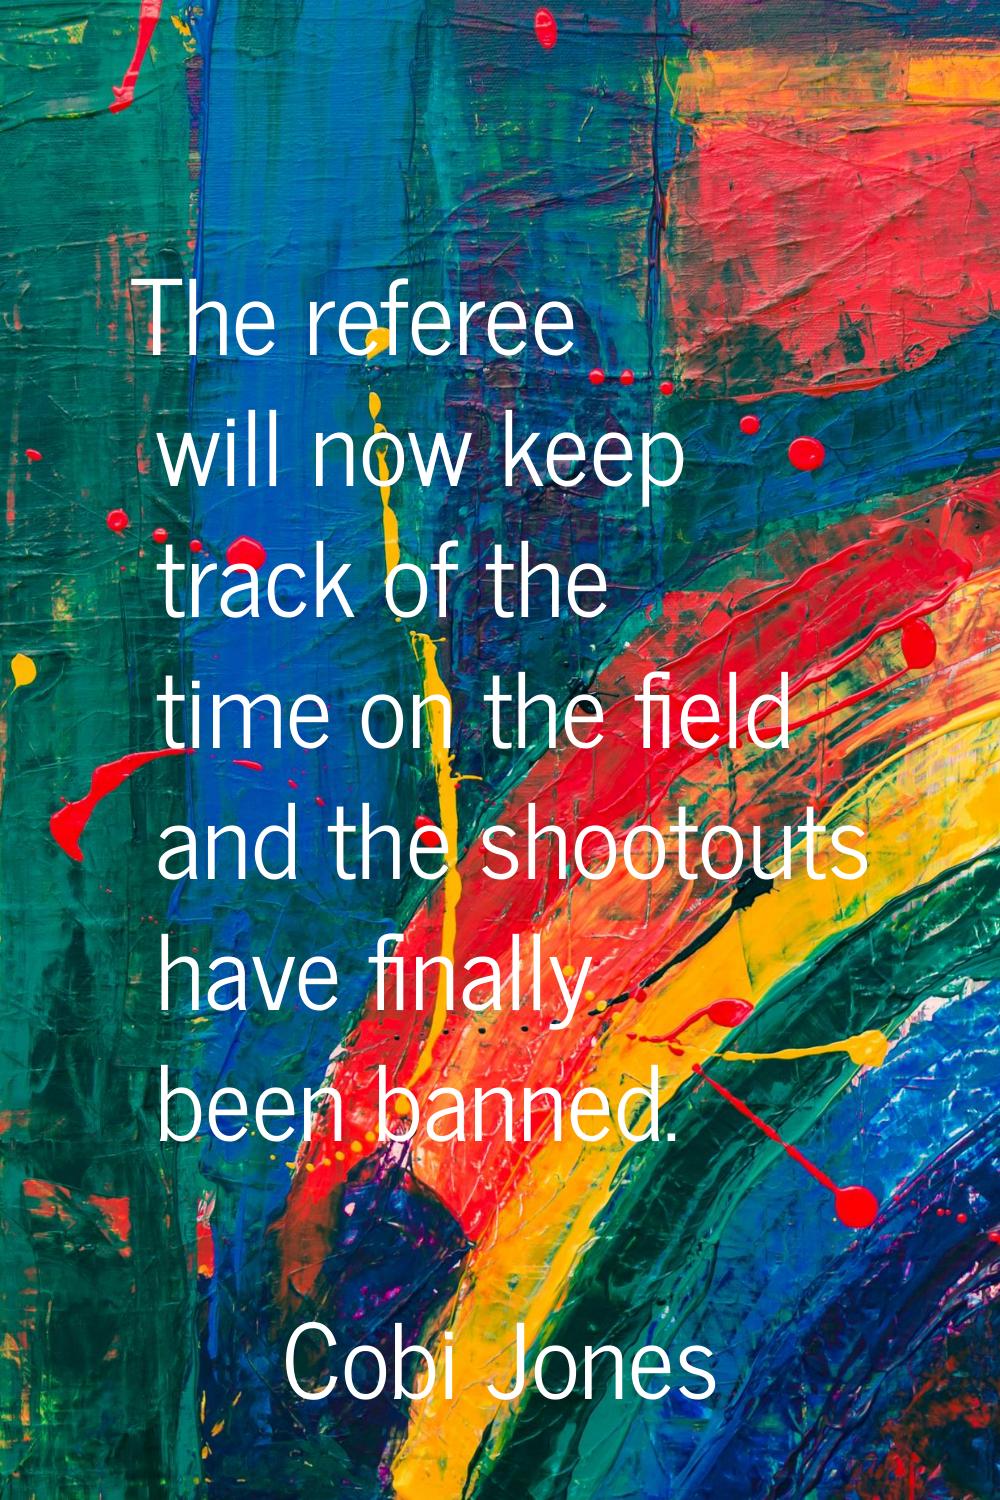 The referee will now keep track of the time on the field and the shootouts have finally been banned